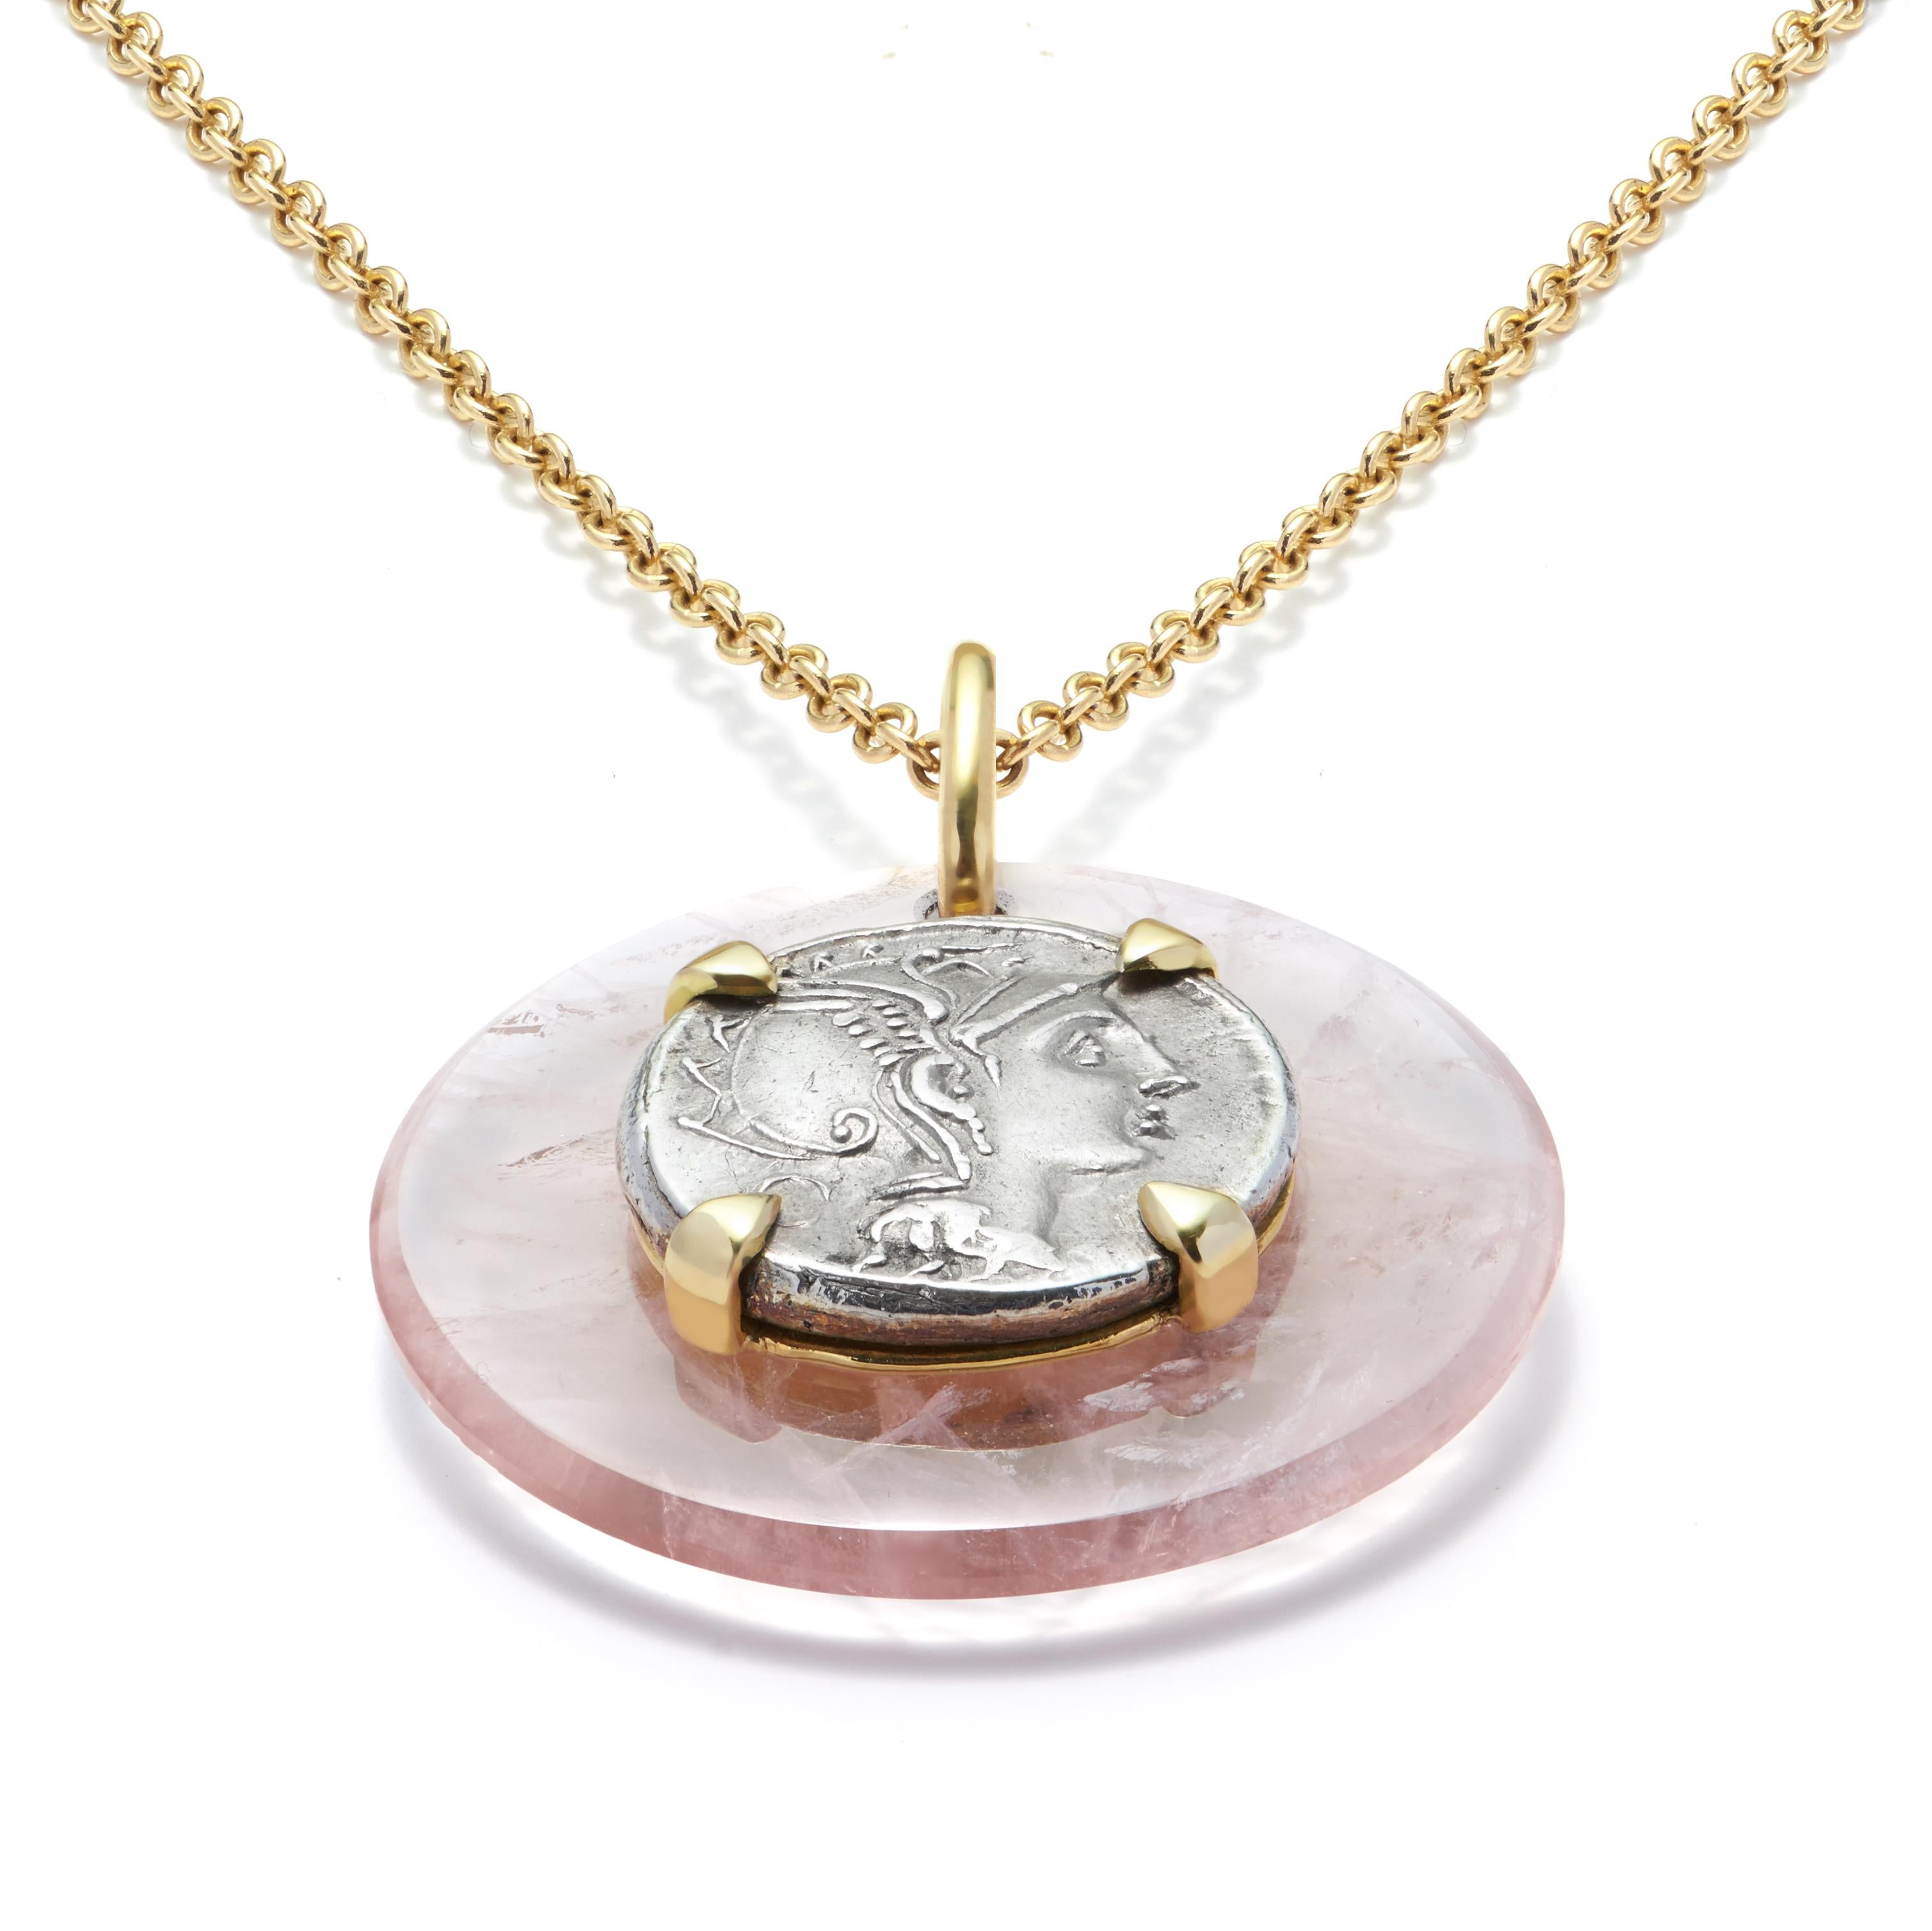 This DUBINI coin necklace from the 'Empires' collection features an authentic Roman denarius silver coin circa 111-110 B.C. set in 18kt gold on a rose quartz disc suspended on a rolo chain with a lobster clasp closure and an adjustable fit.

Disc